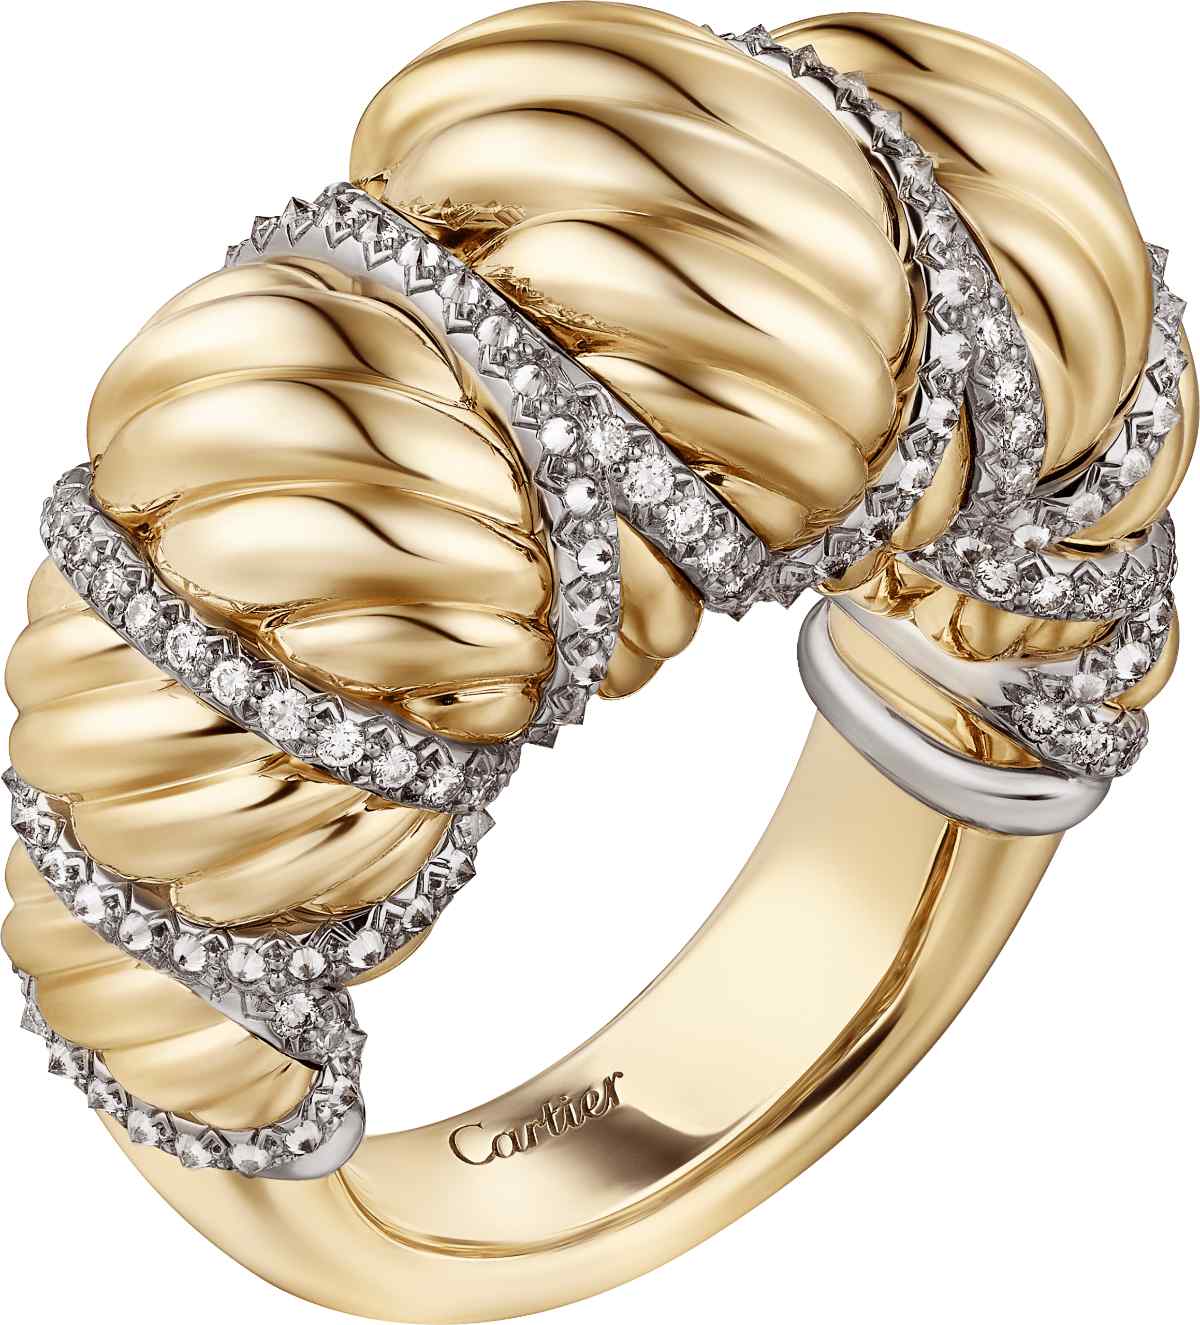 Cartier Presents “Tressage”, An Exceptional Addition To The Libre Collection